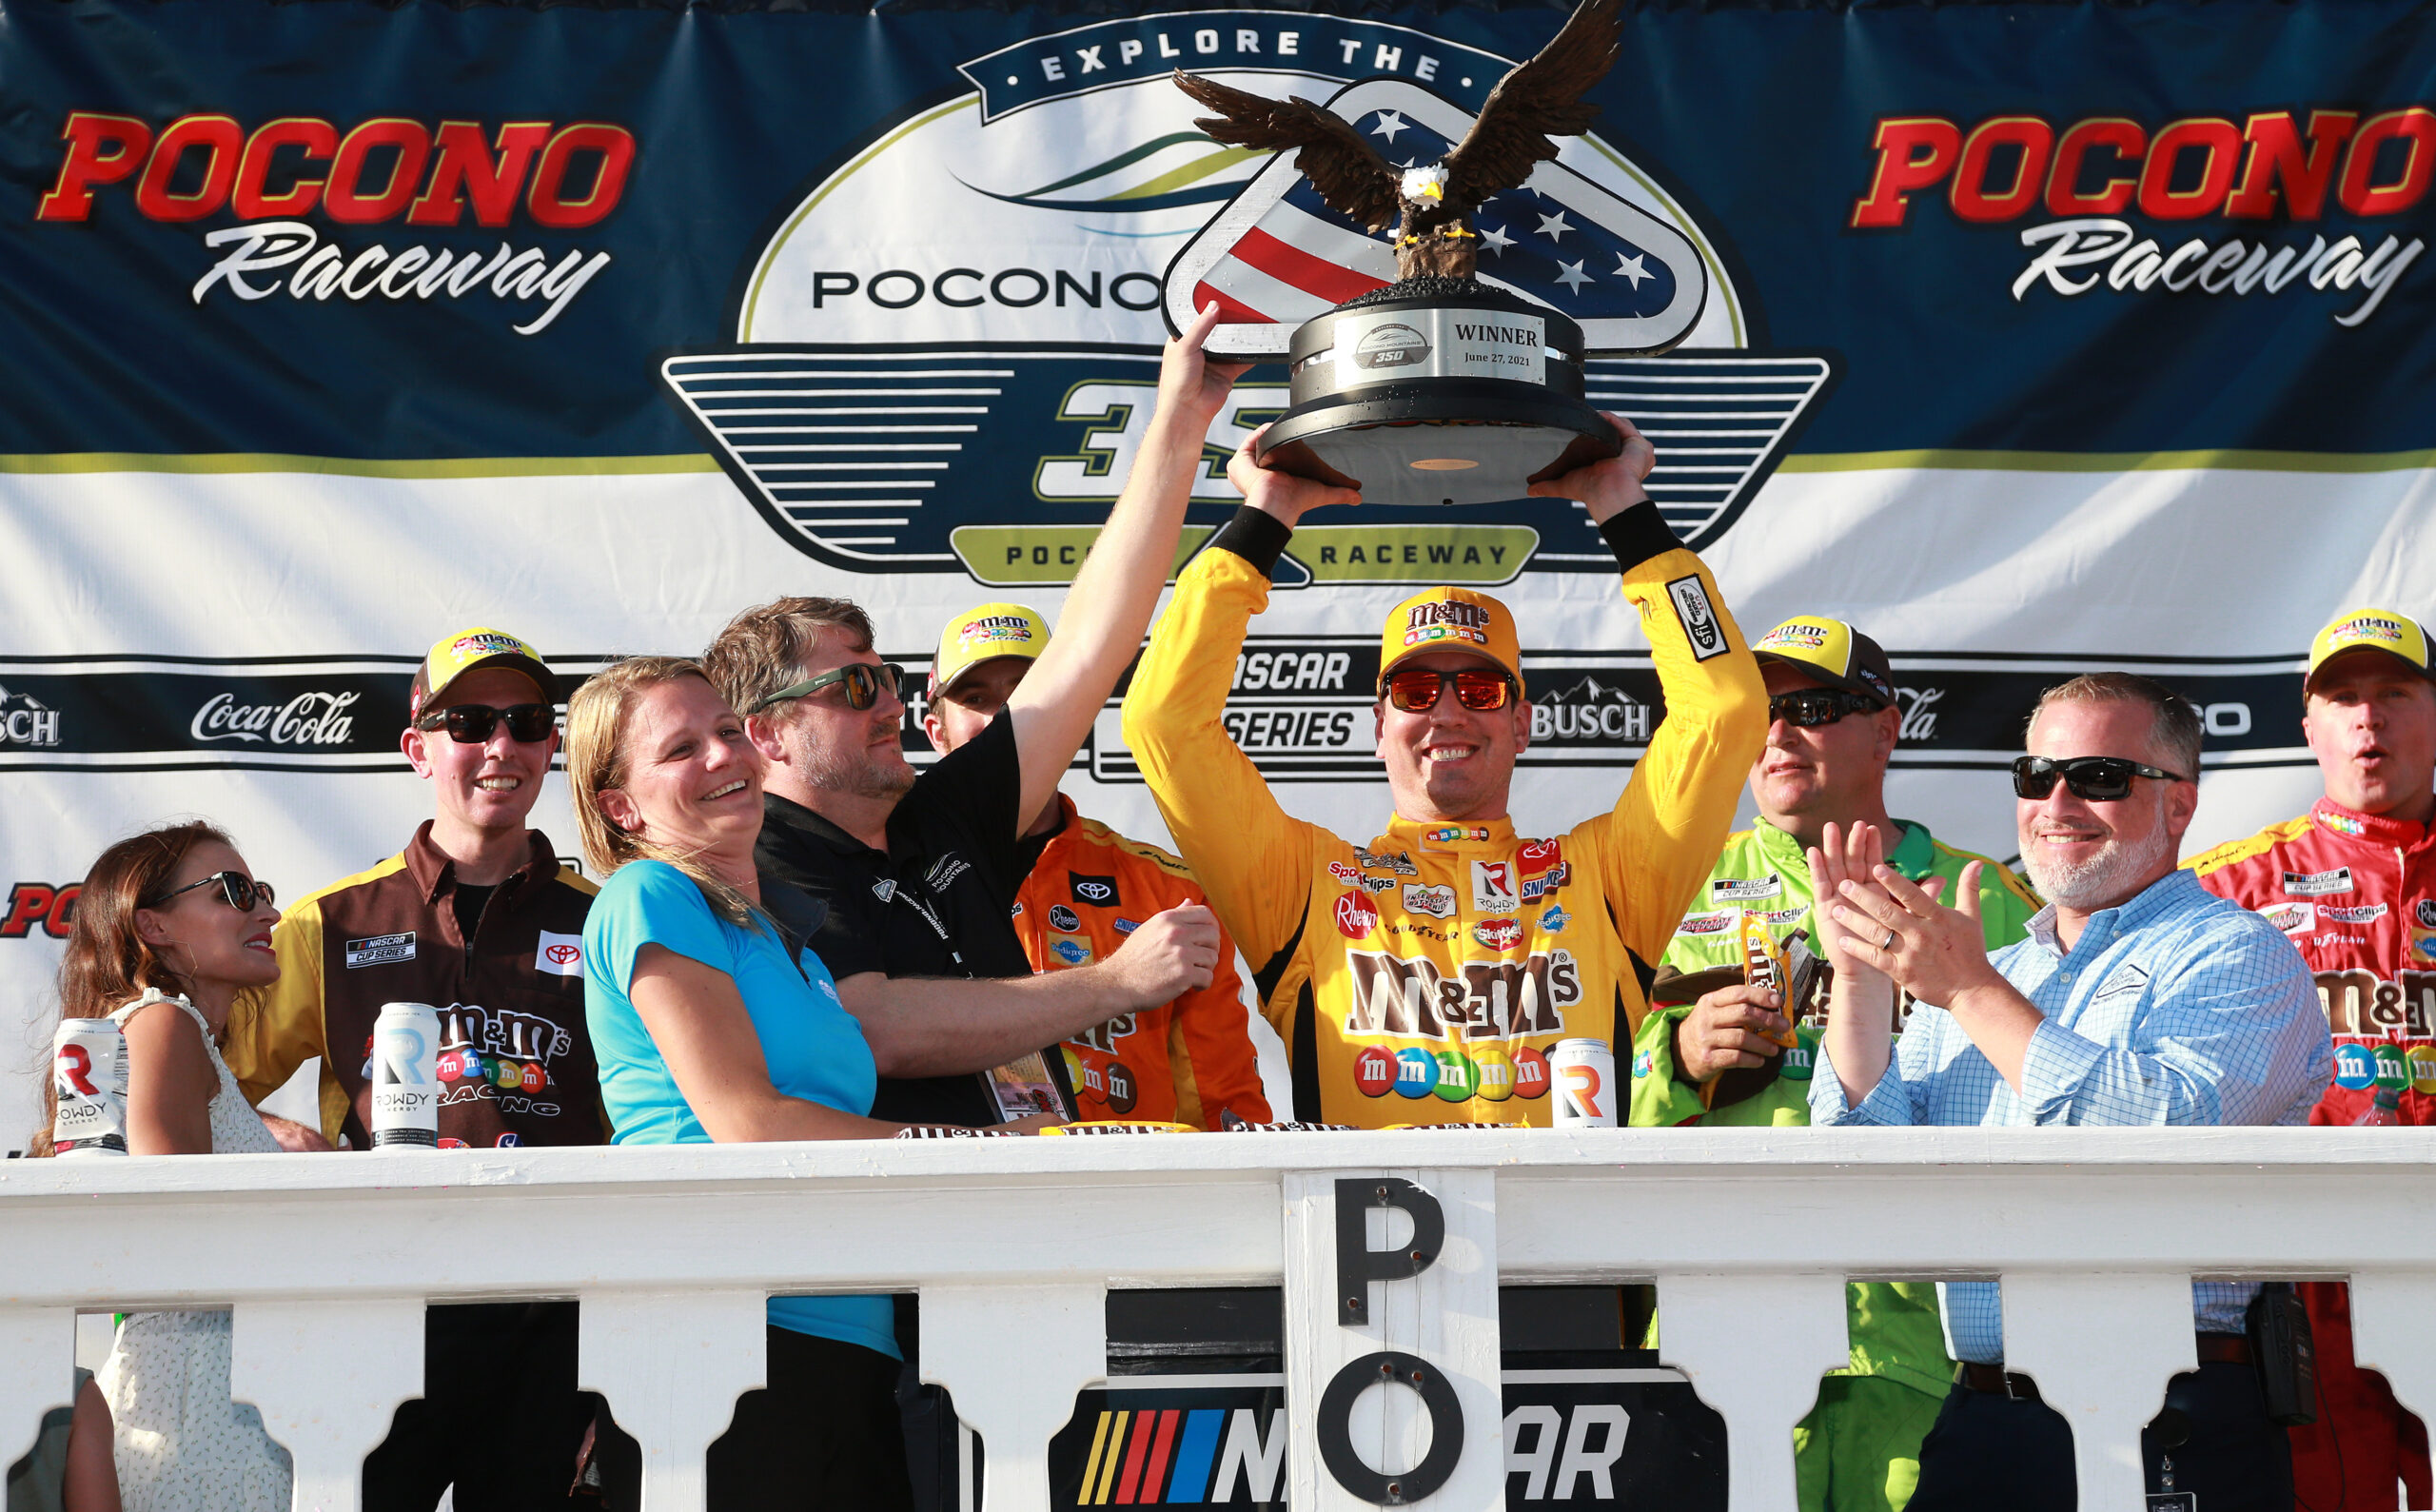 Kyle Busch wins second race of Pocono NASCAR series race with busted clutch